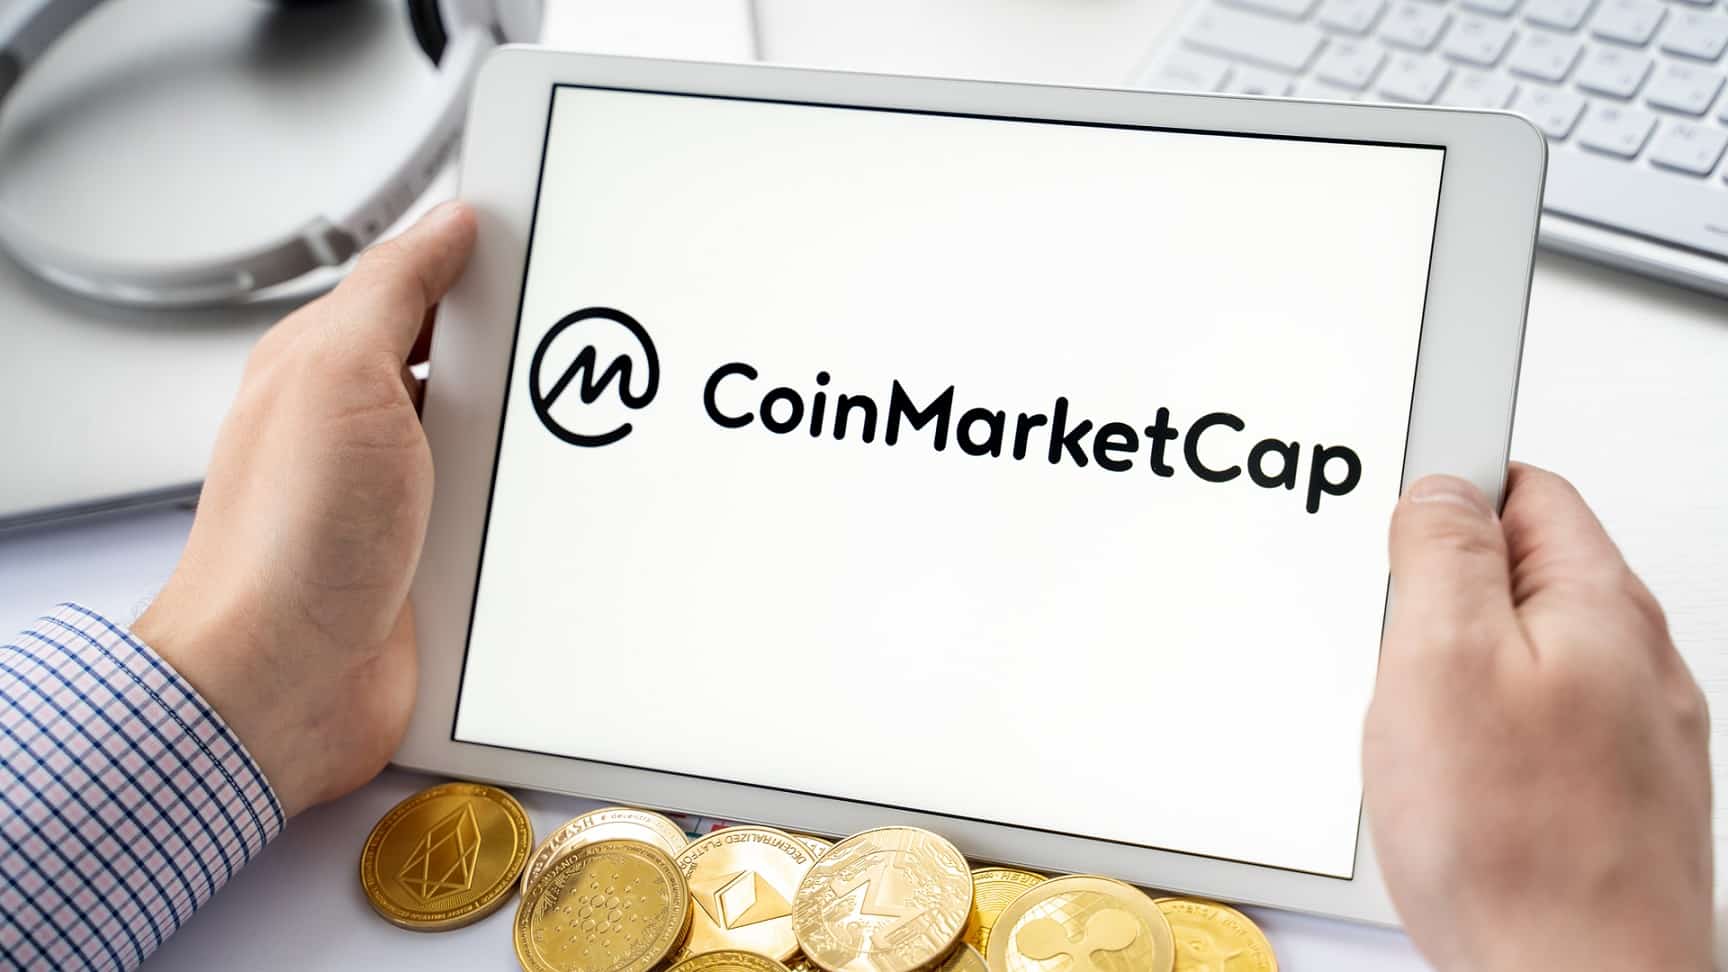 CoinMarketCap comes with a significant collaboration